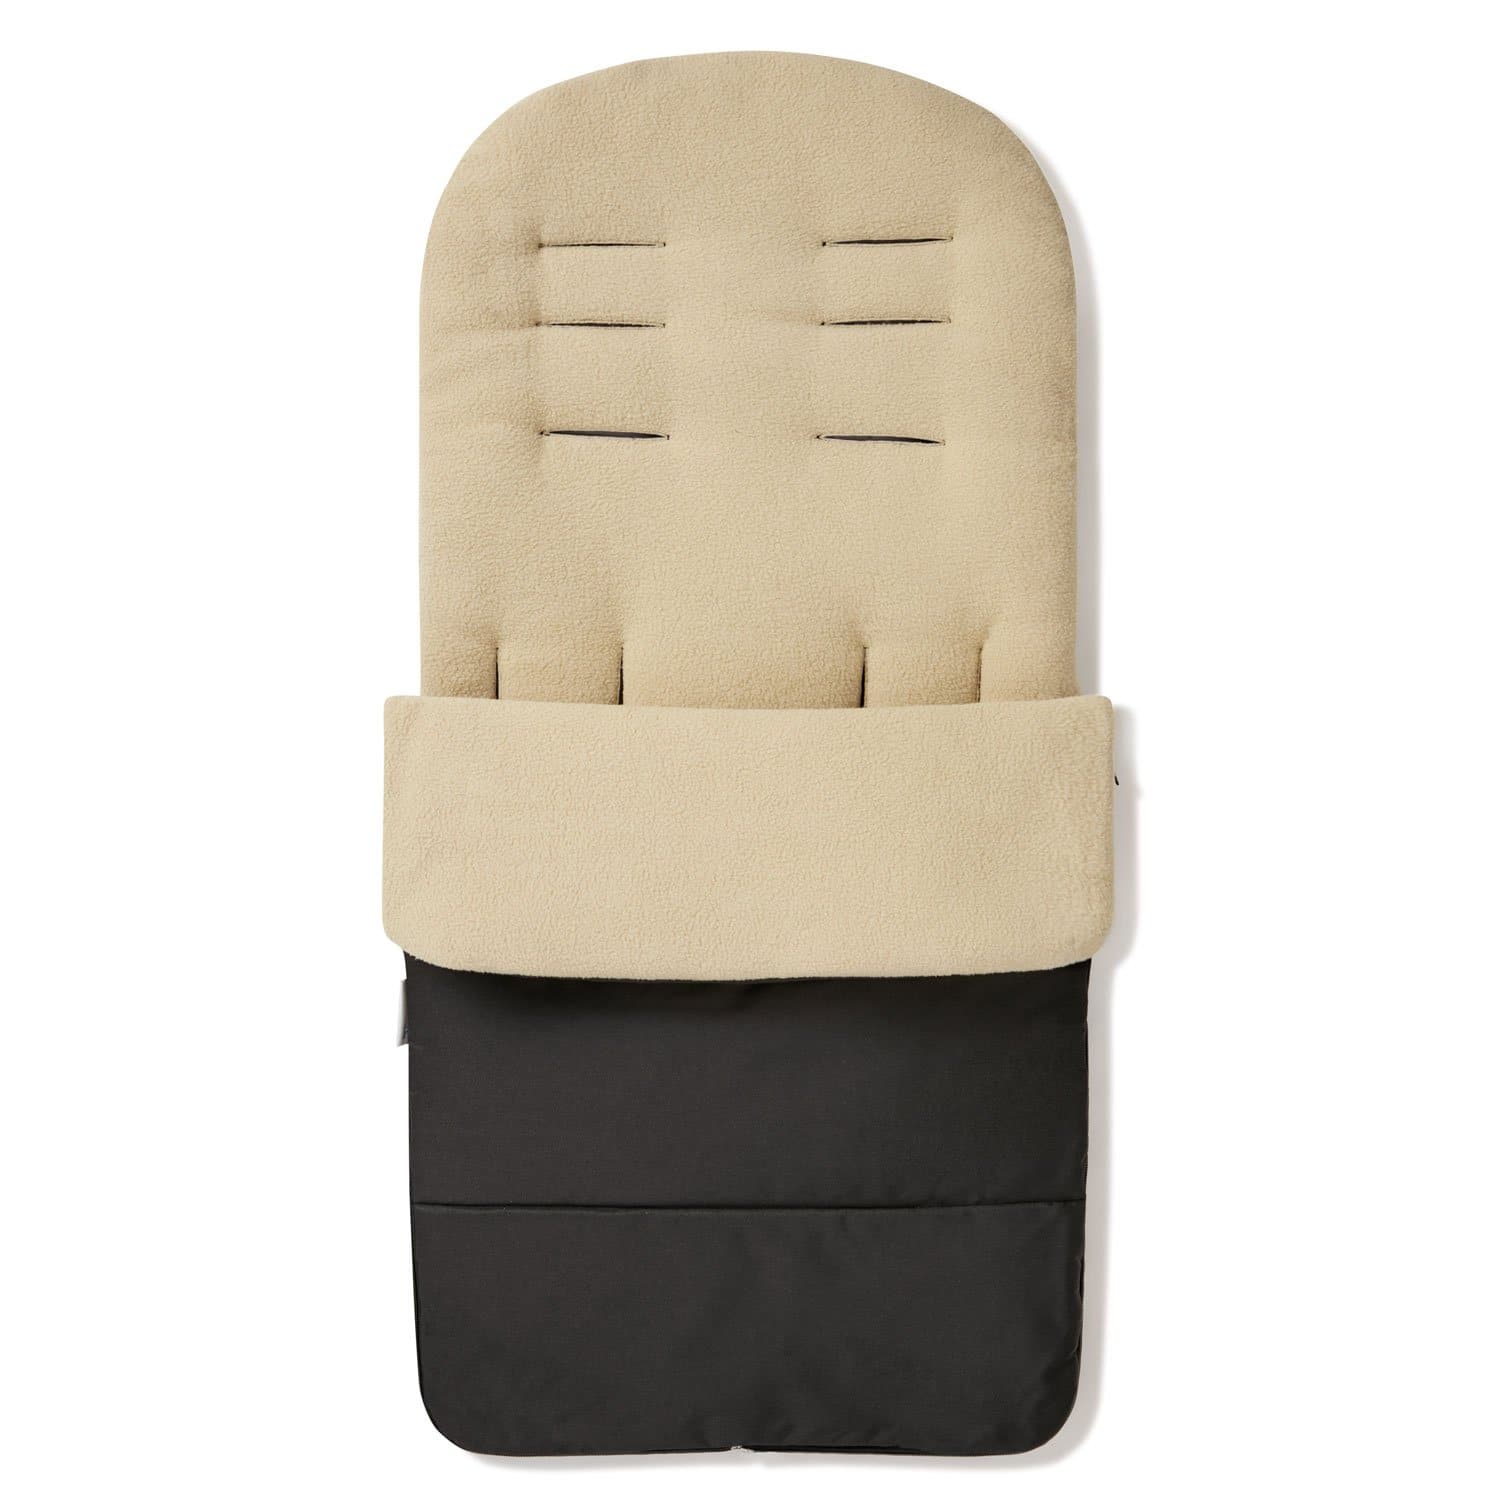 Premium Footmuff / Cosy Toes Compatible with Babylo - Desert Sand / Fits All Models | For Your Little One